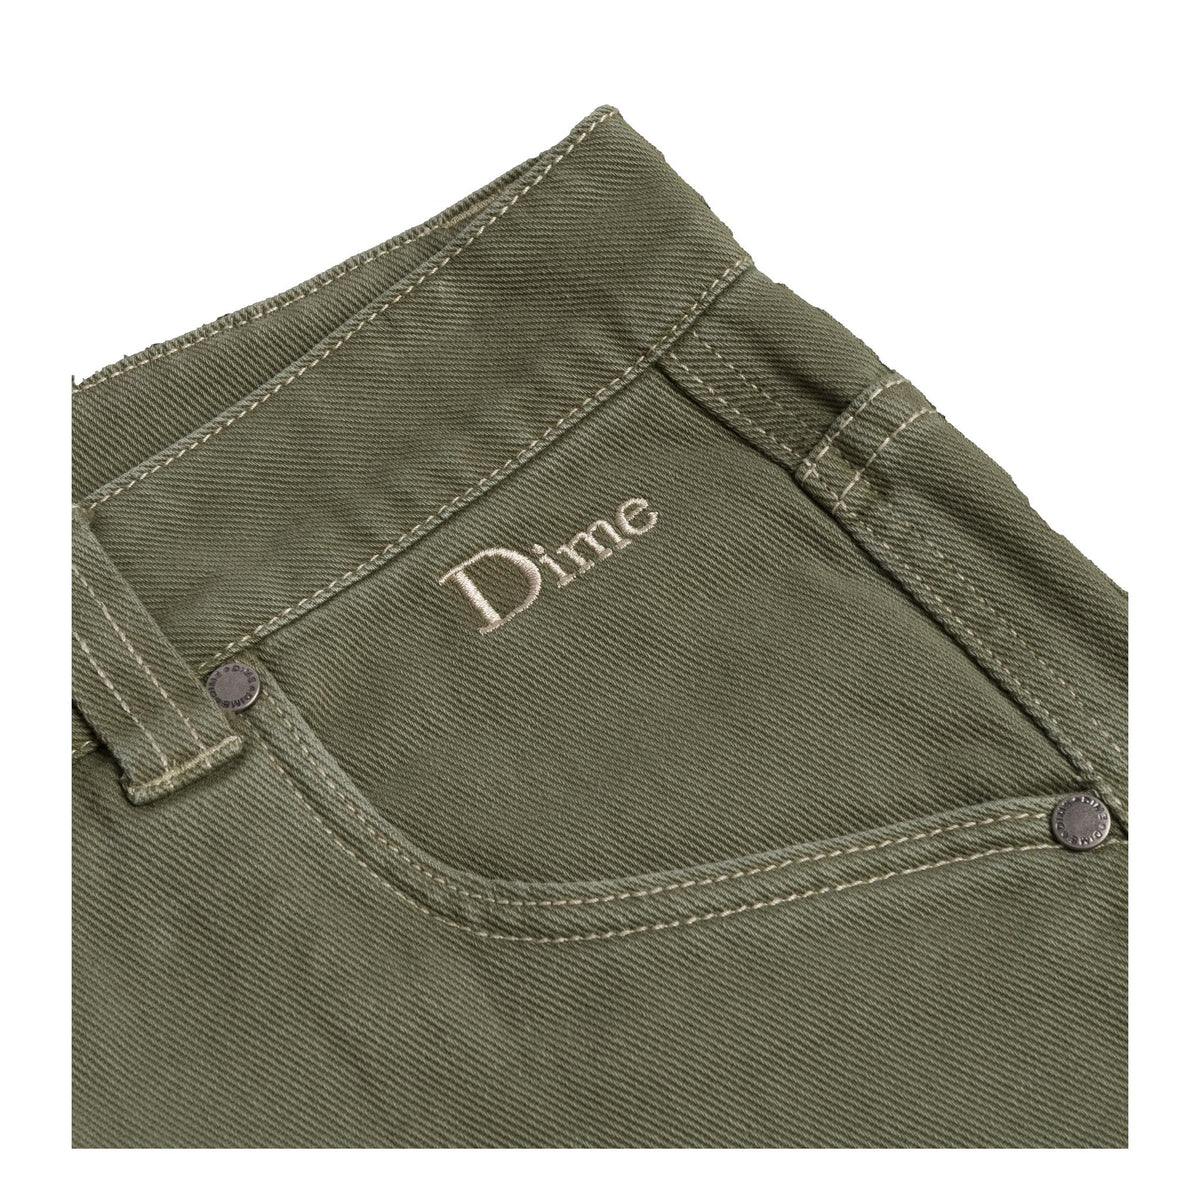 Dime Relaxed Denim Pants Green Washed - Venue Skateboards